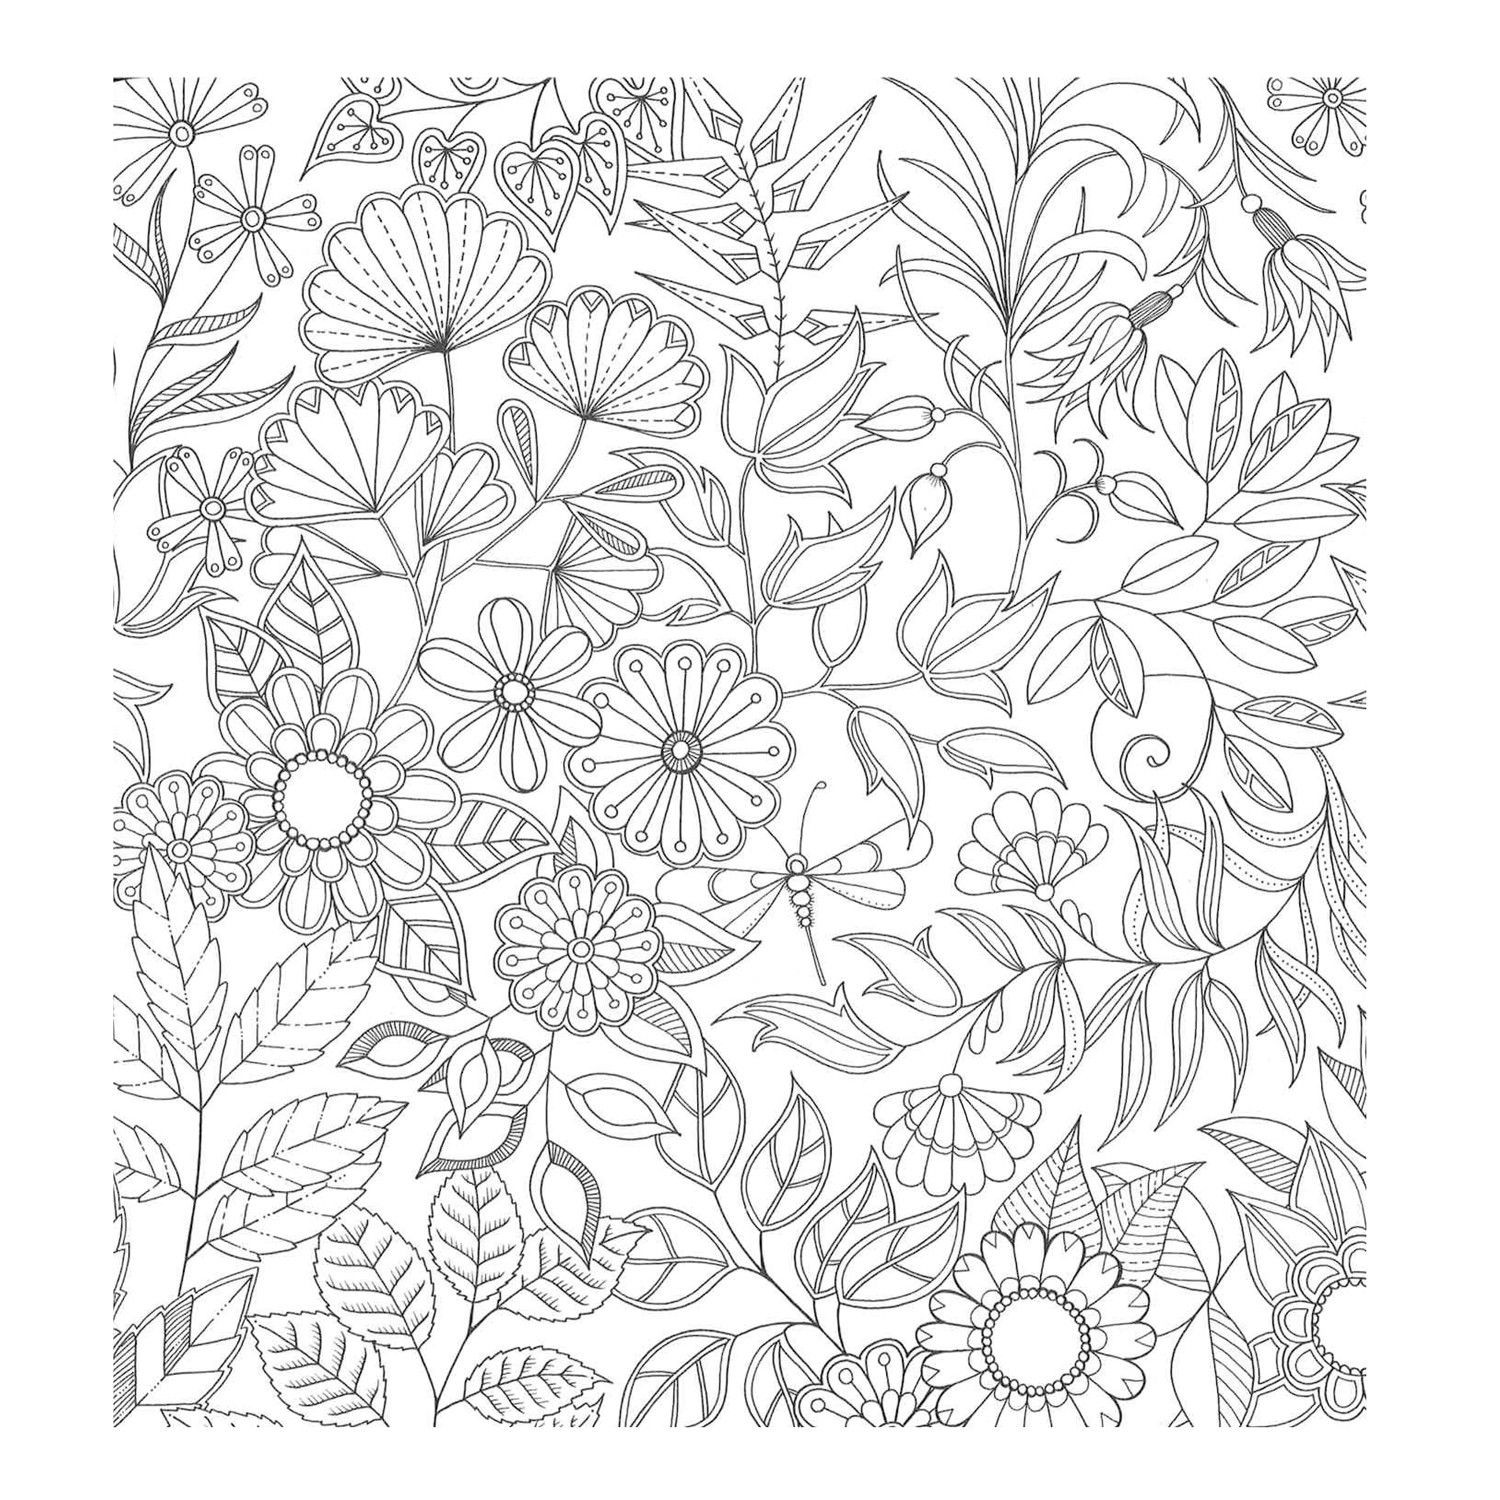 Coloring Pages : Secret Garden By Johanna Basford Coloring Book ...